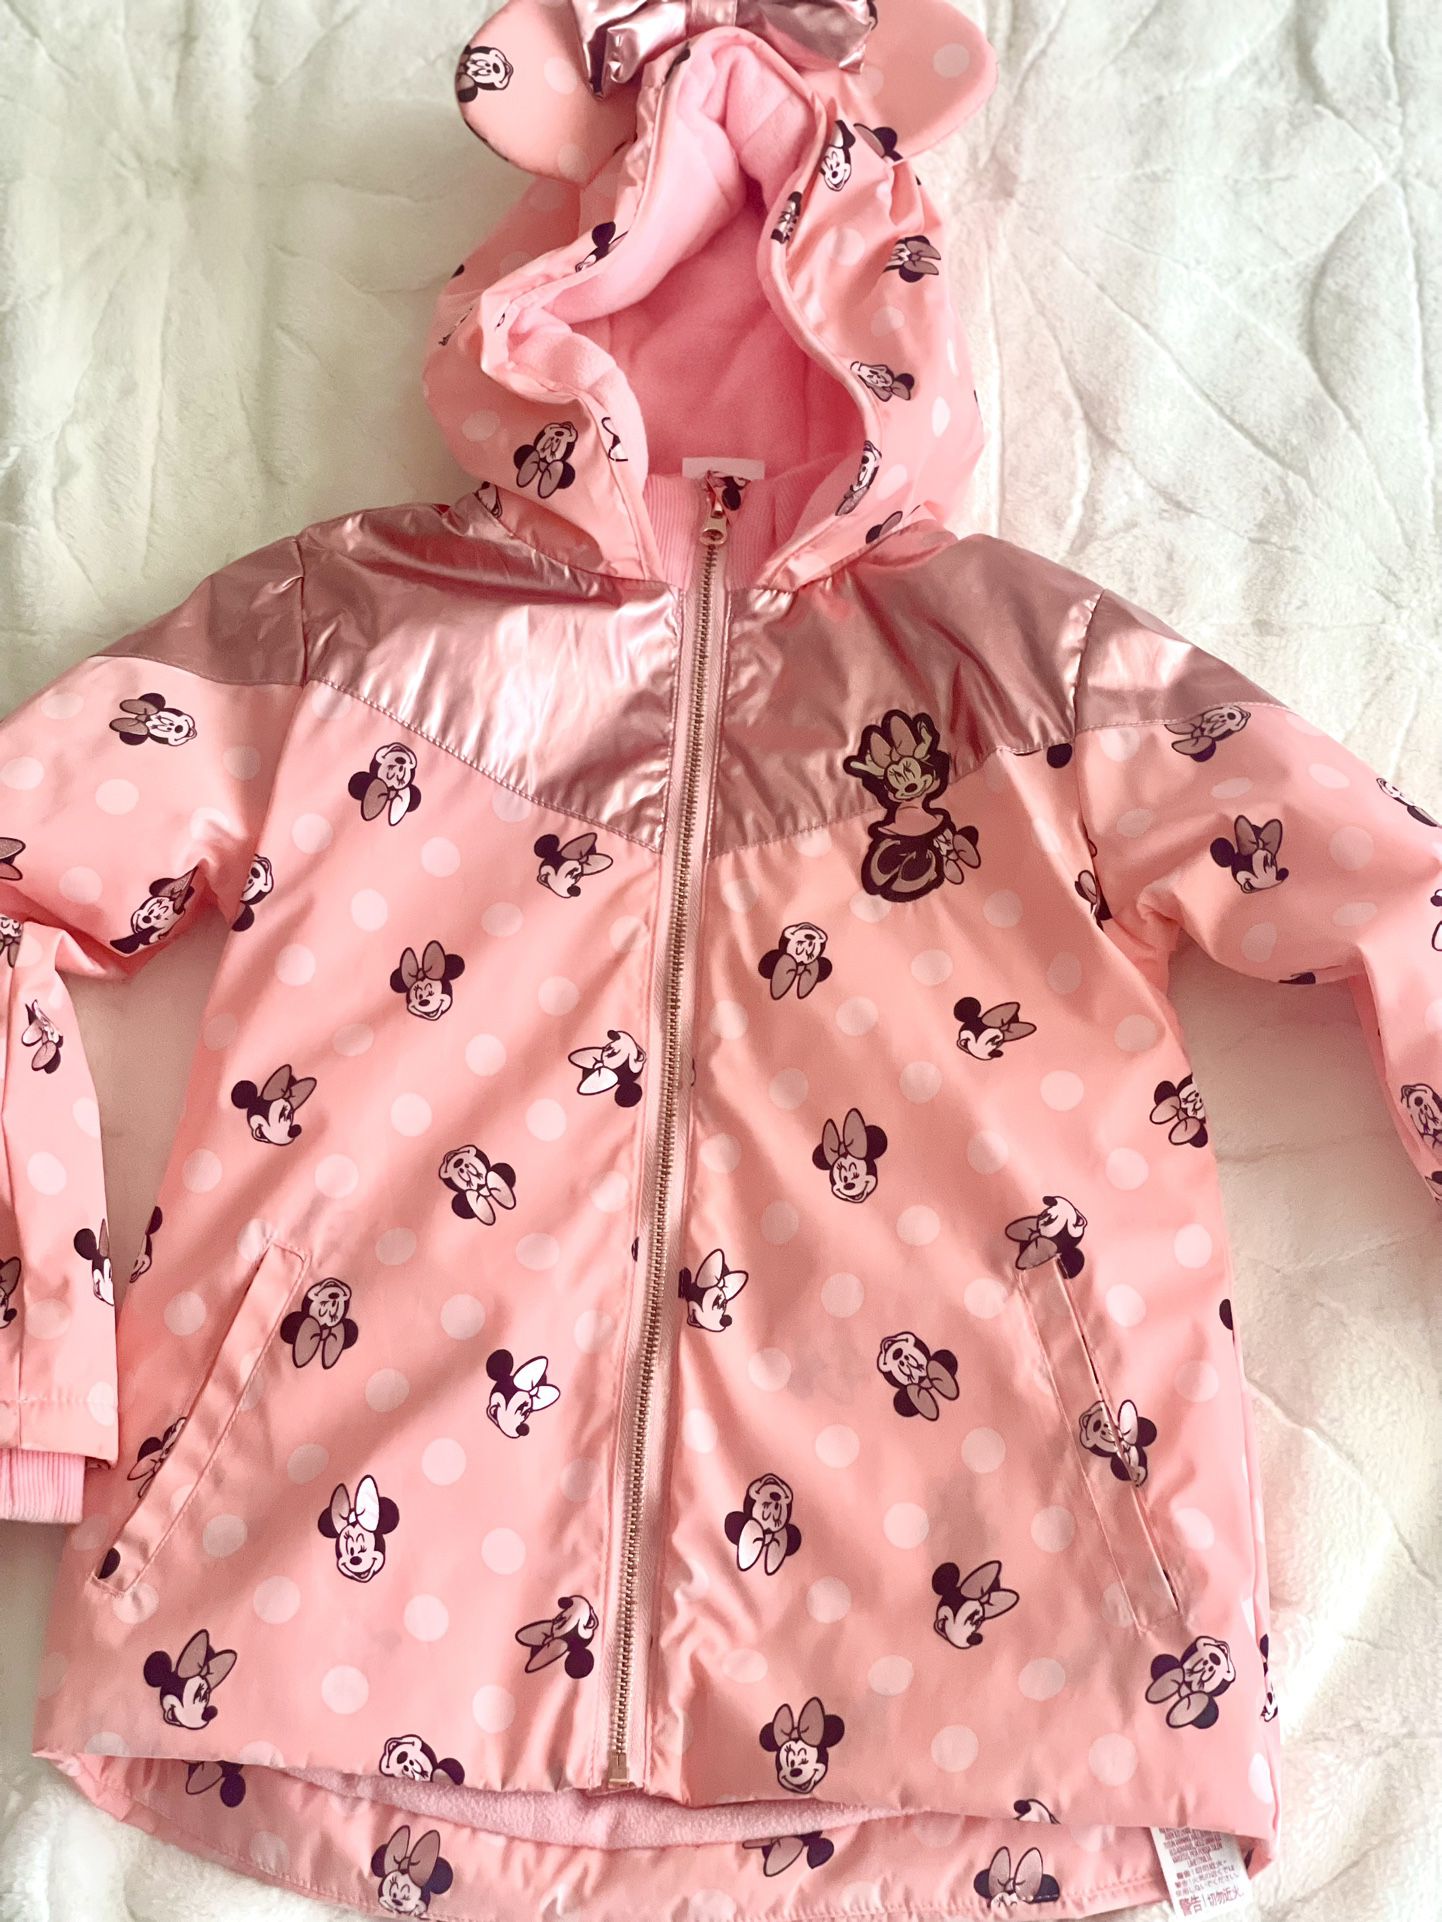 DISNEY MINNIE MOUSE EARS HOODED ROSE GOLD PINK RAINCOAT Sz 5/6